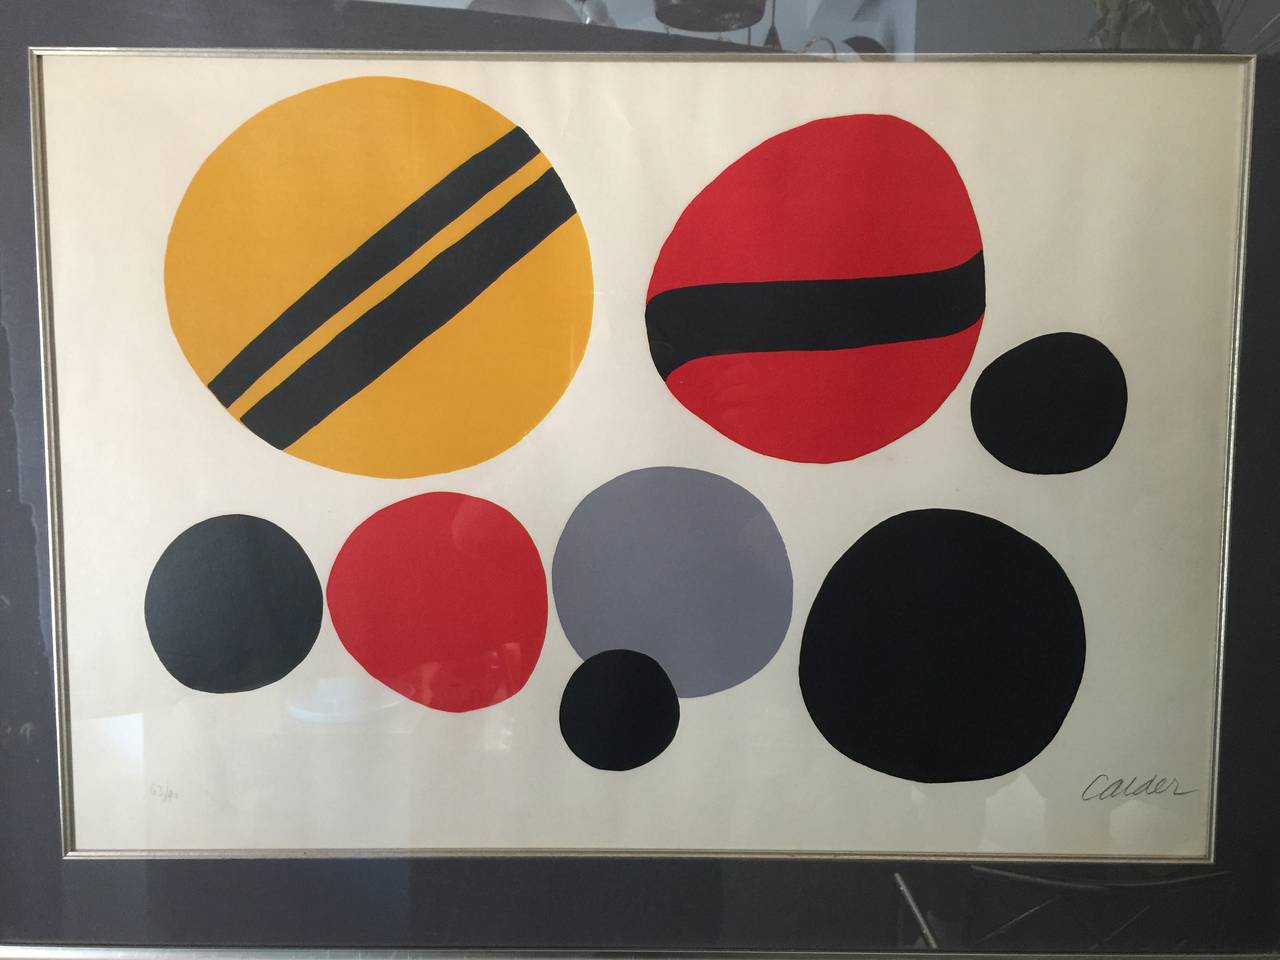 Chevrons Noir sur Rouge et Jaune, 1960, lithograph in colors by Alexander Calder (1898-1976) pencil signed and numbered 63/90. Dimensions for print only are as follows: 25 inches H x 35 inches W.

See detailed images for documentation from the